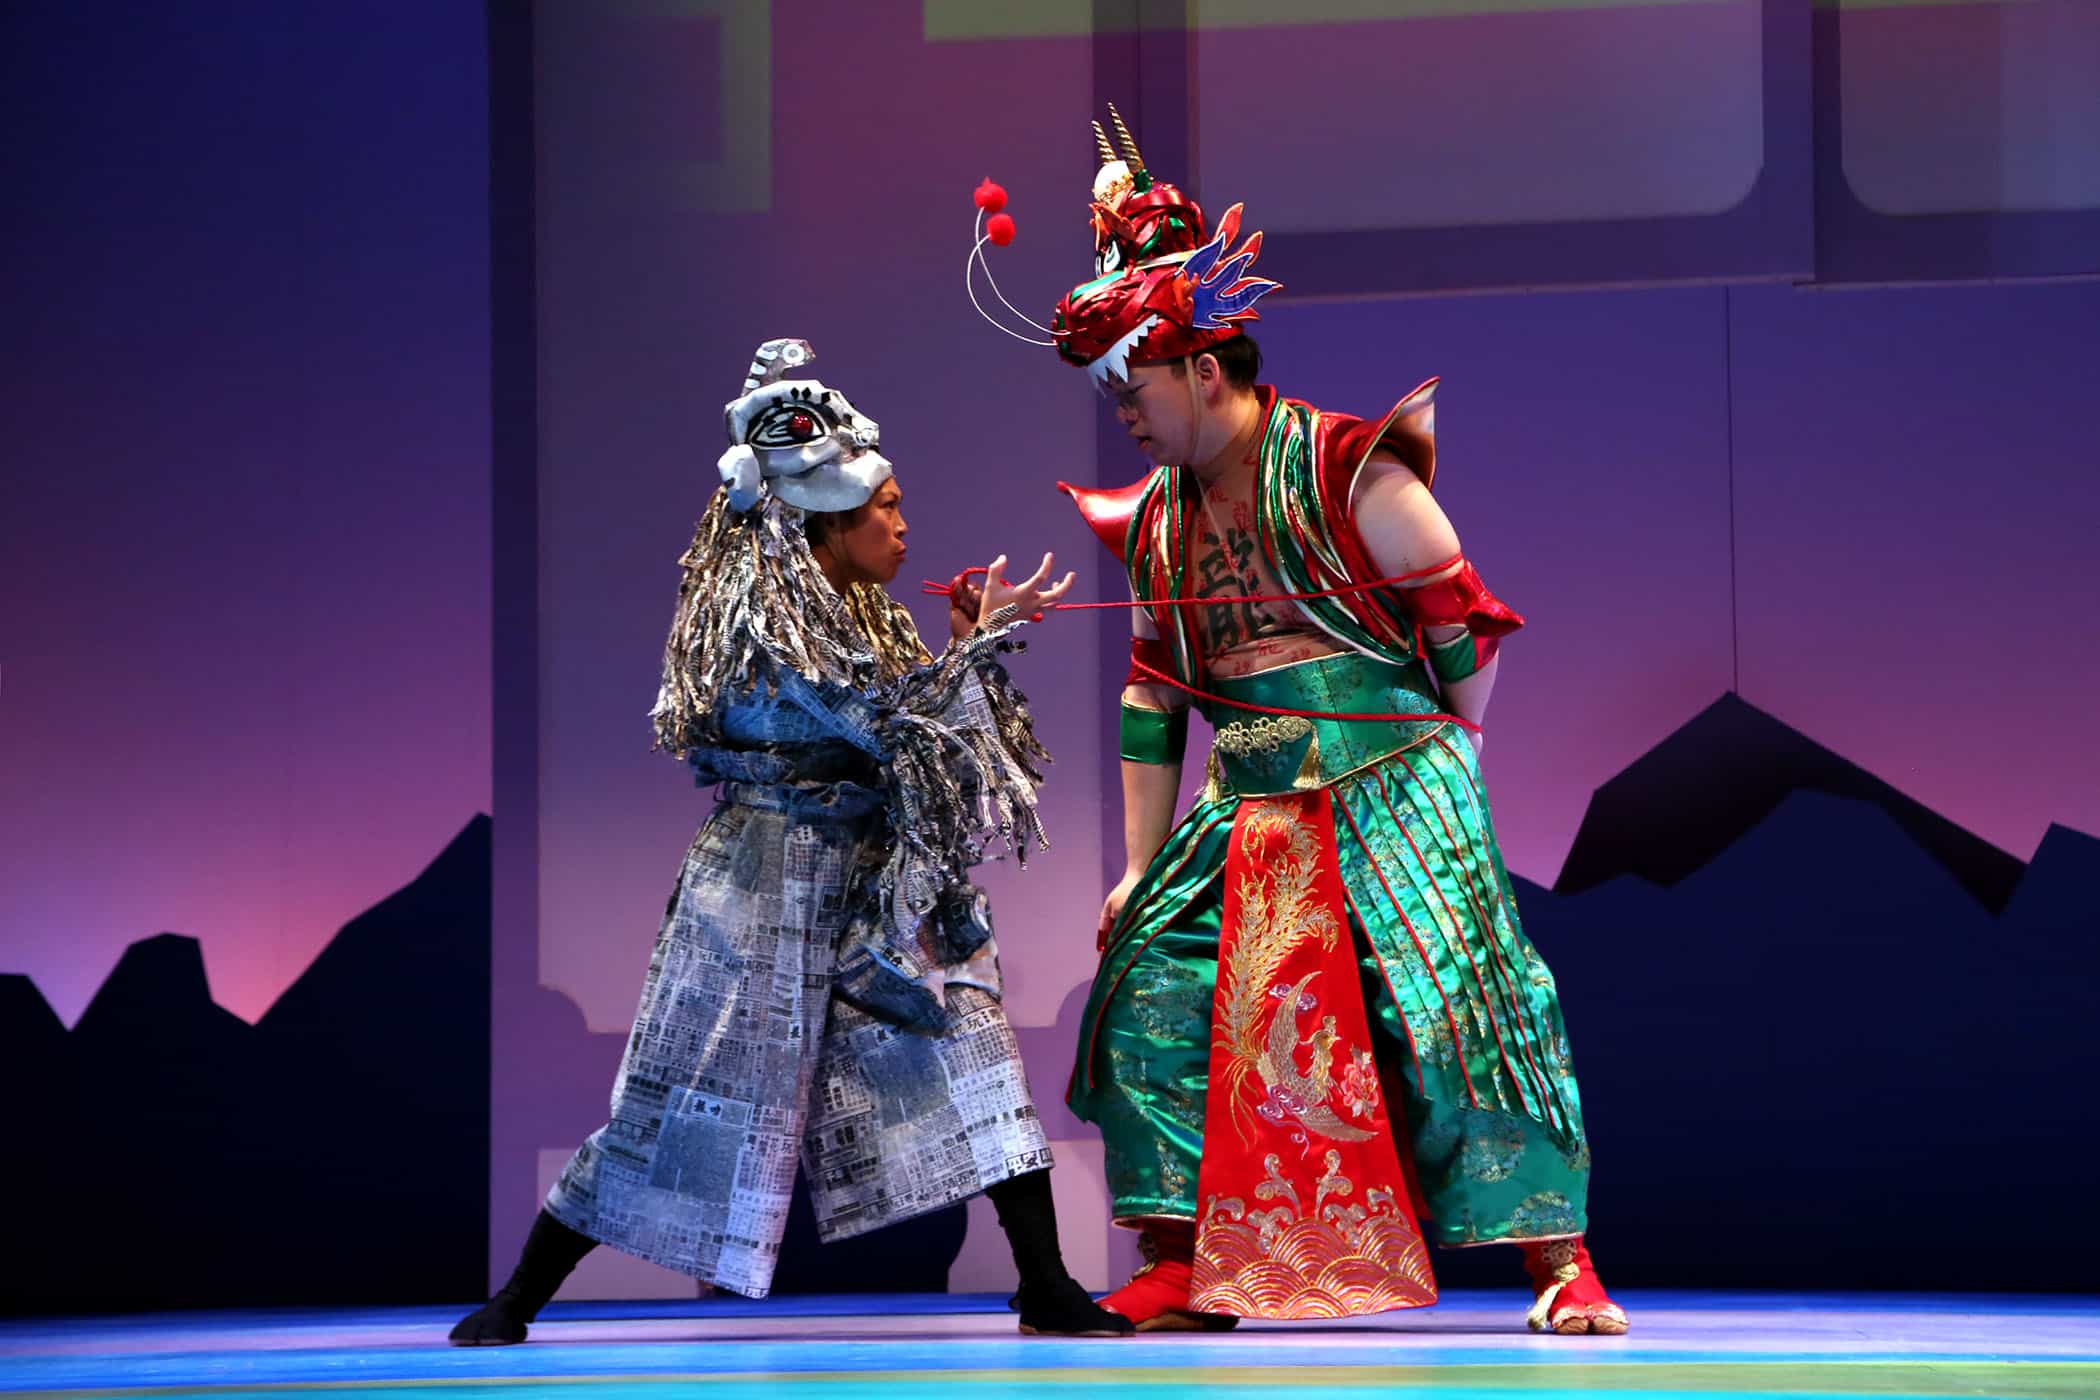 Characters on stage performing "Where the Mountain Meets the Moon" wear colorful costumes